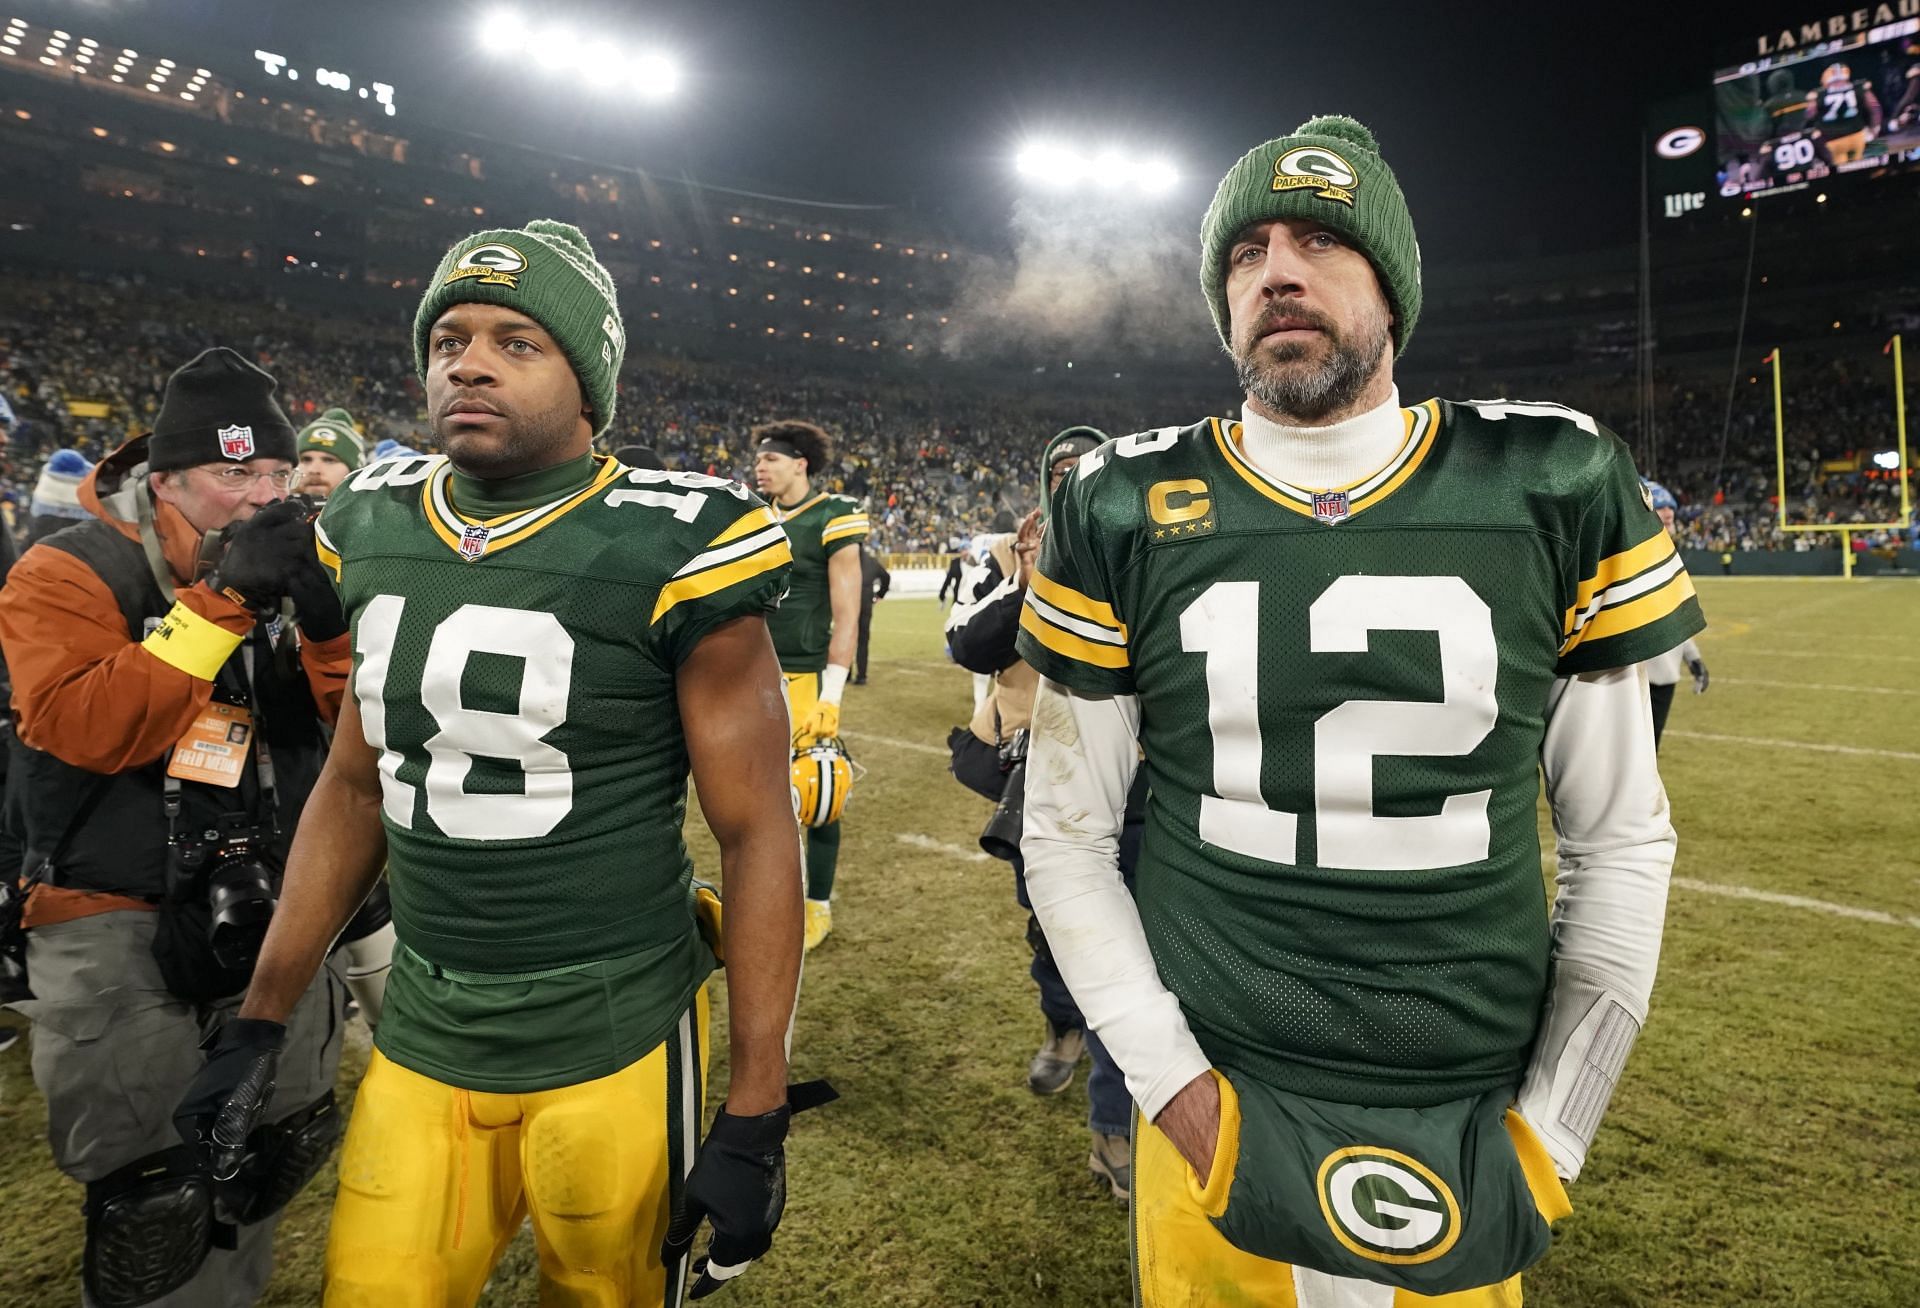 Aaron Rodgers #12 and Randall Cobb #18 walk off the field after losing to the Detroit Lions